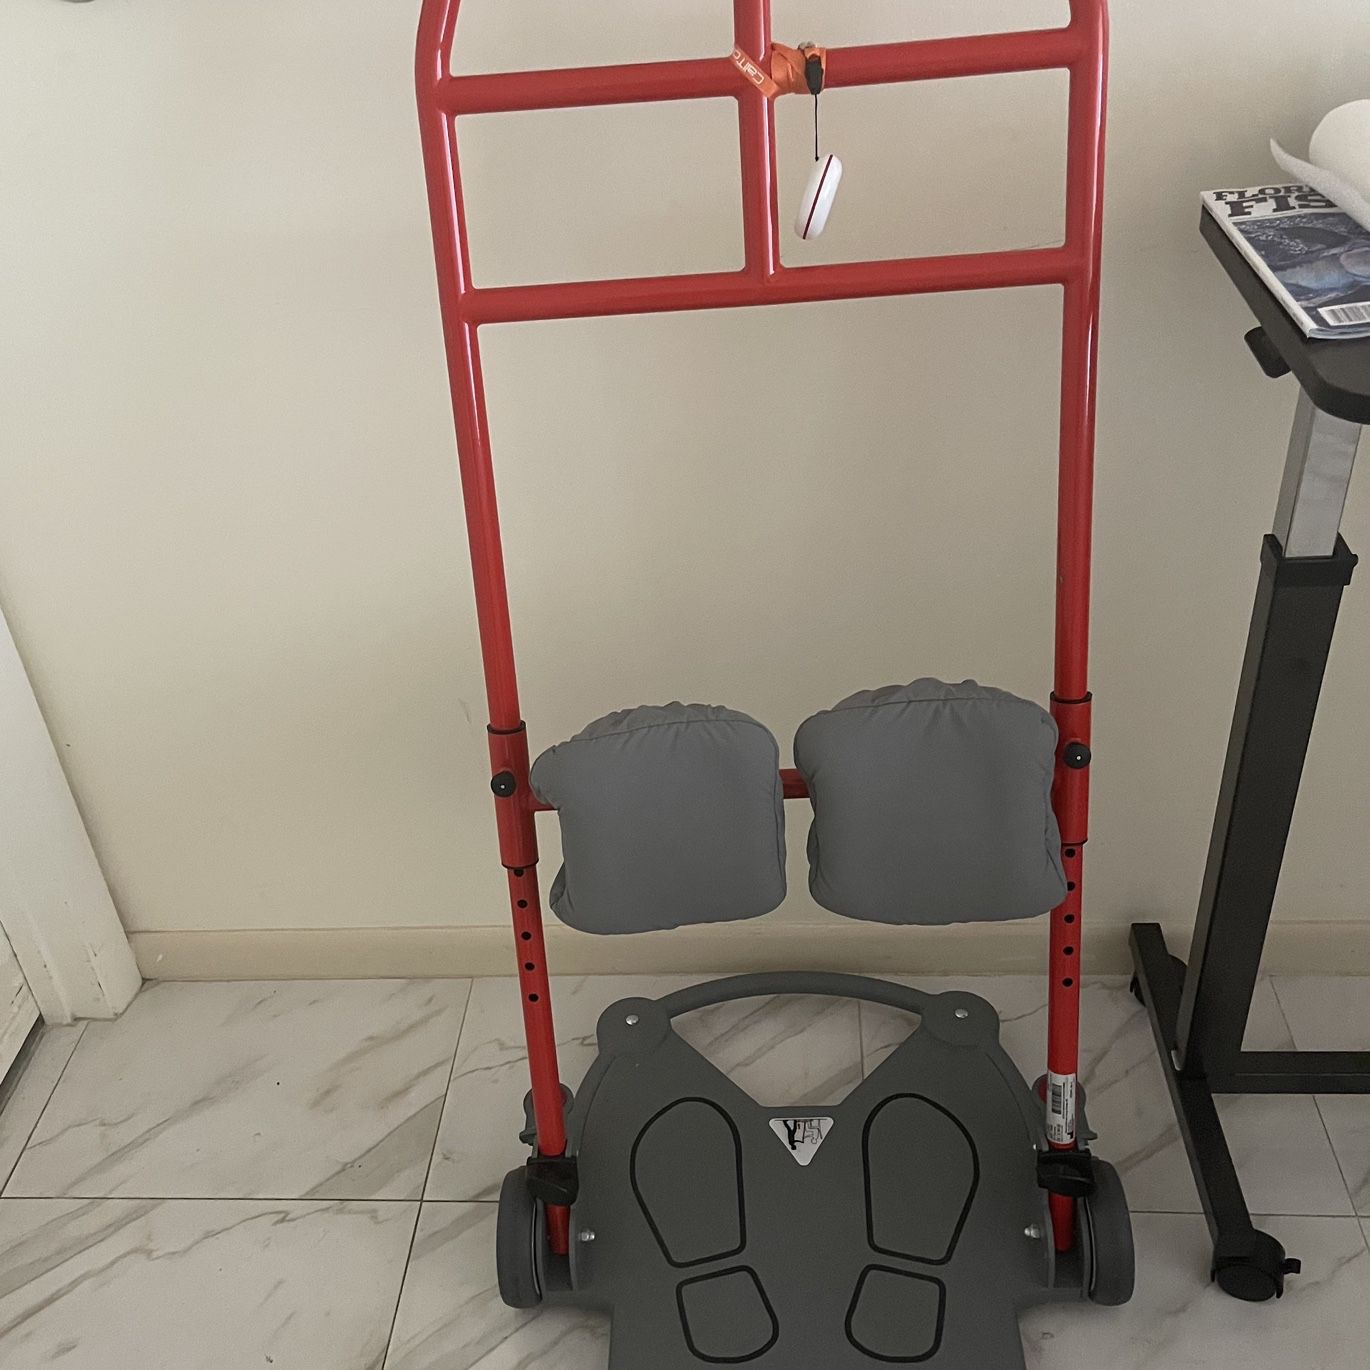 Sit-to-Stand Lift To Transfer Immobile Person At Home Or In A Facility